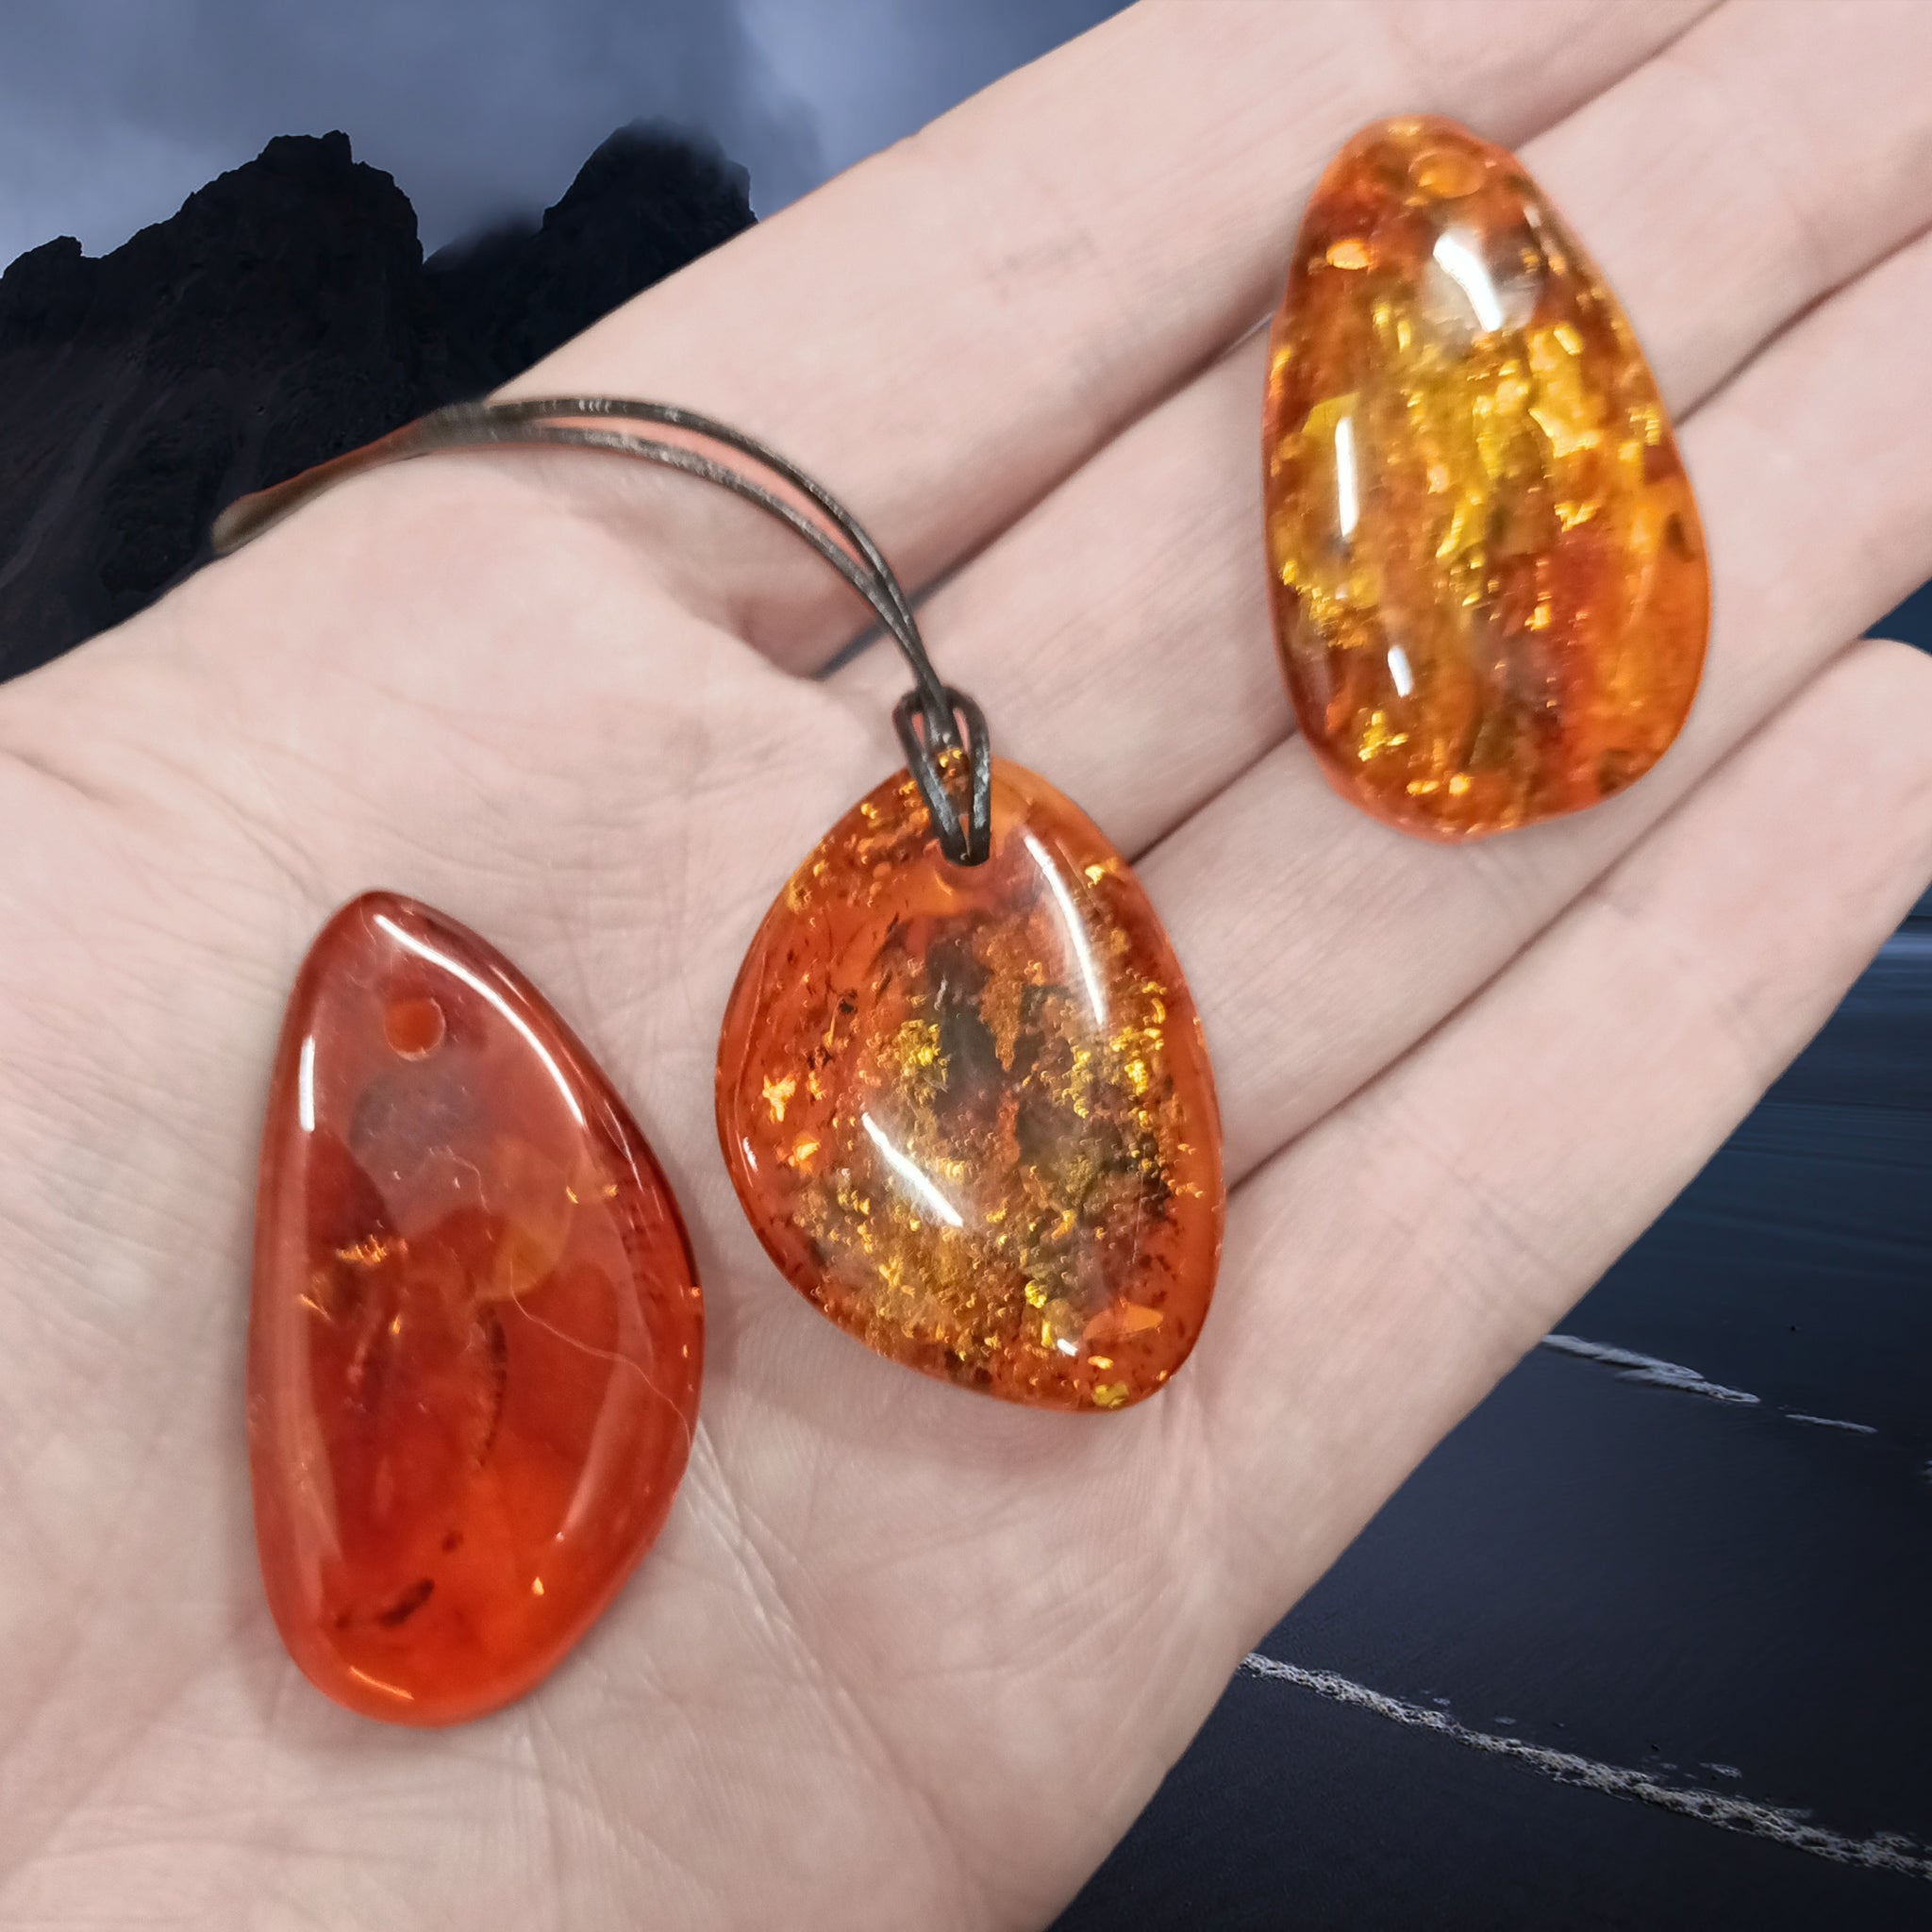 Large Amber Amulet Pendants on Hand - With or Without Leather Thong